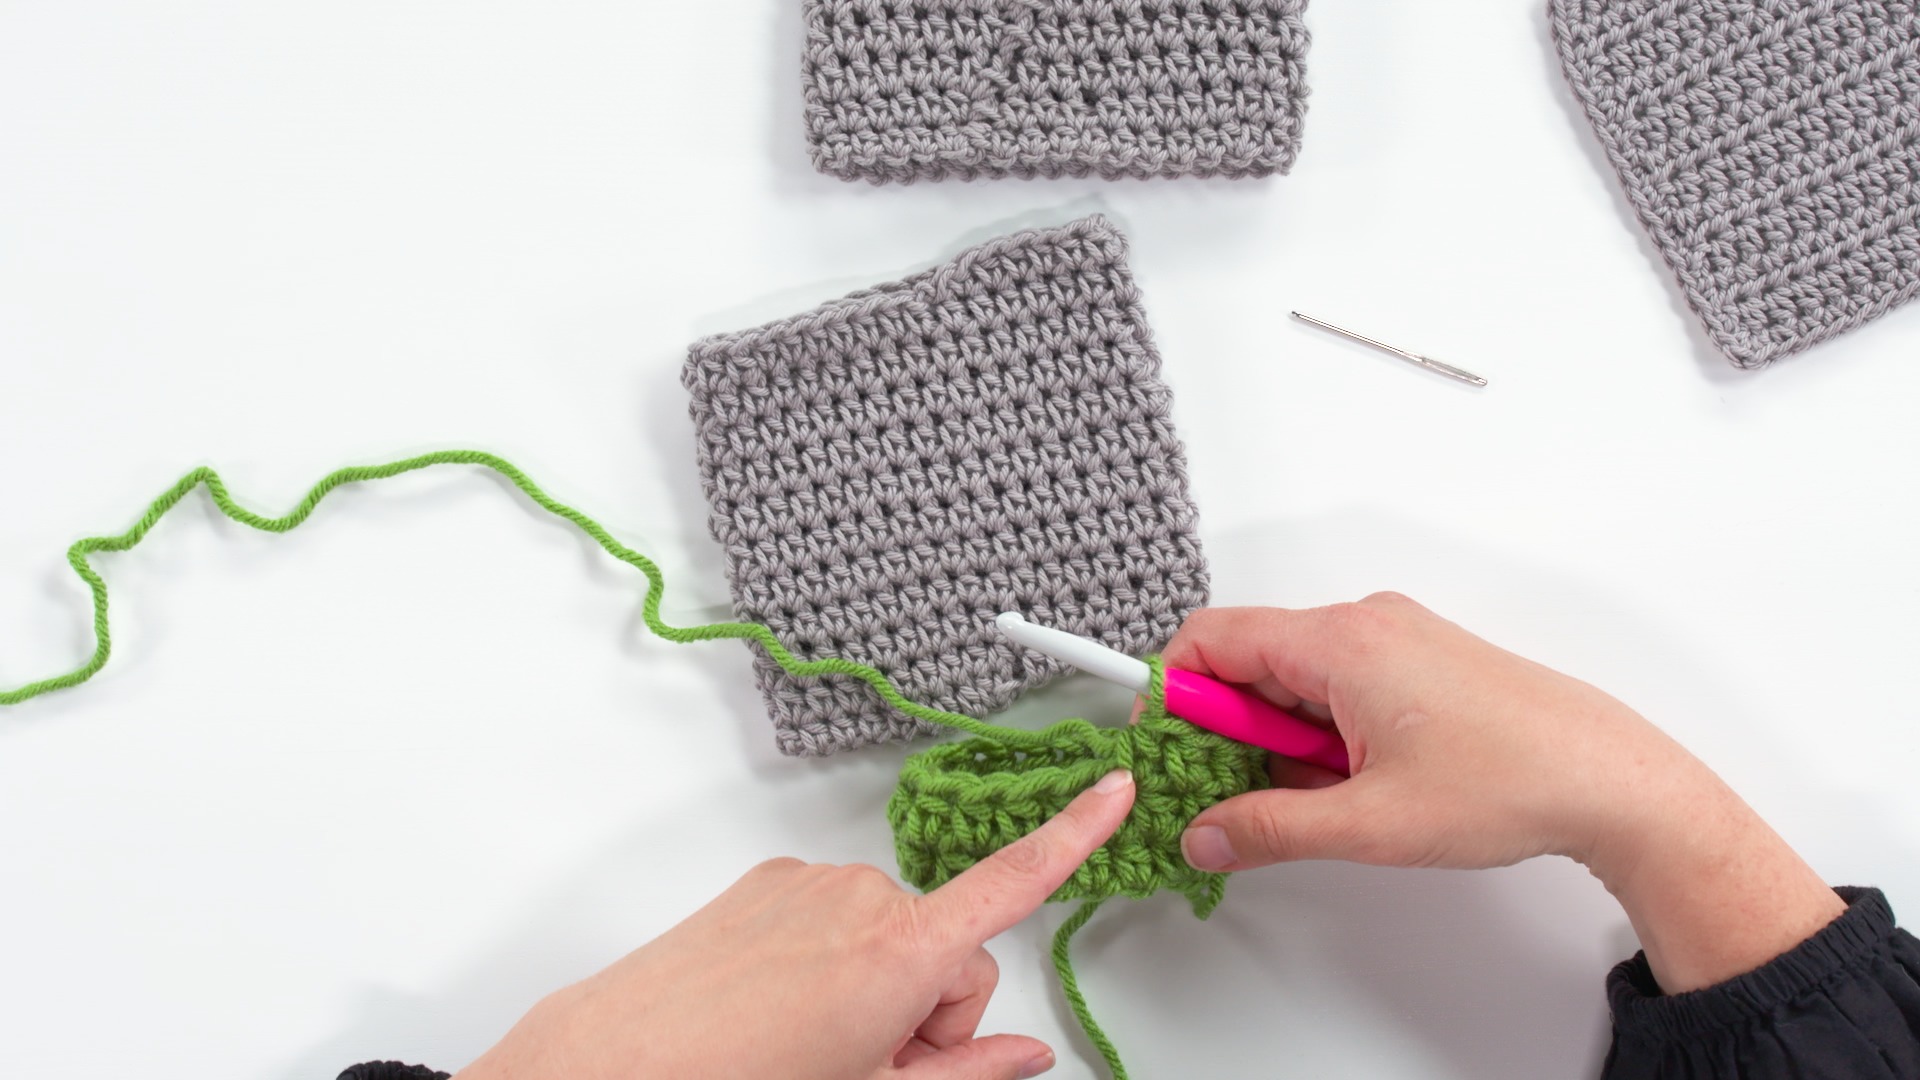 14-Day Learn to Crochet Series: Day 11